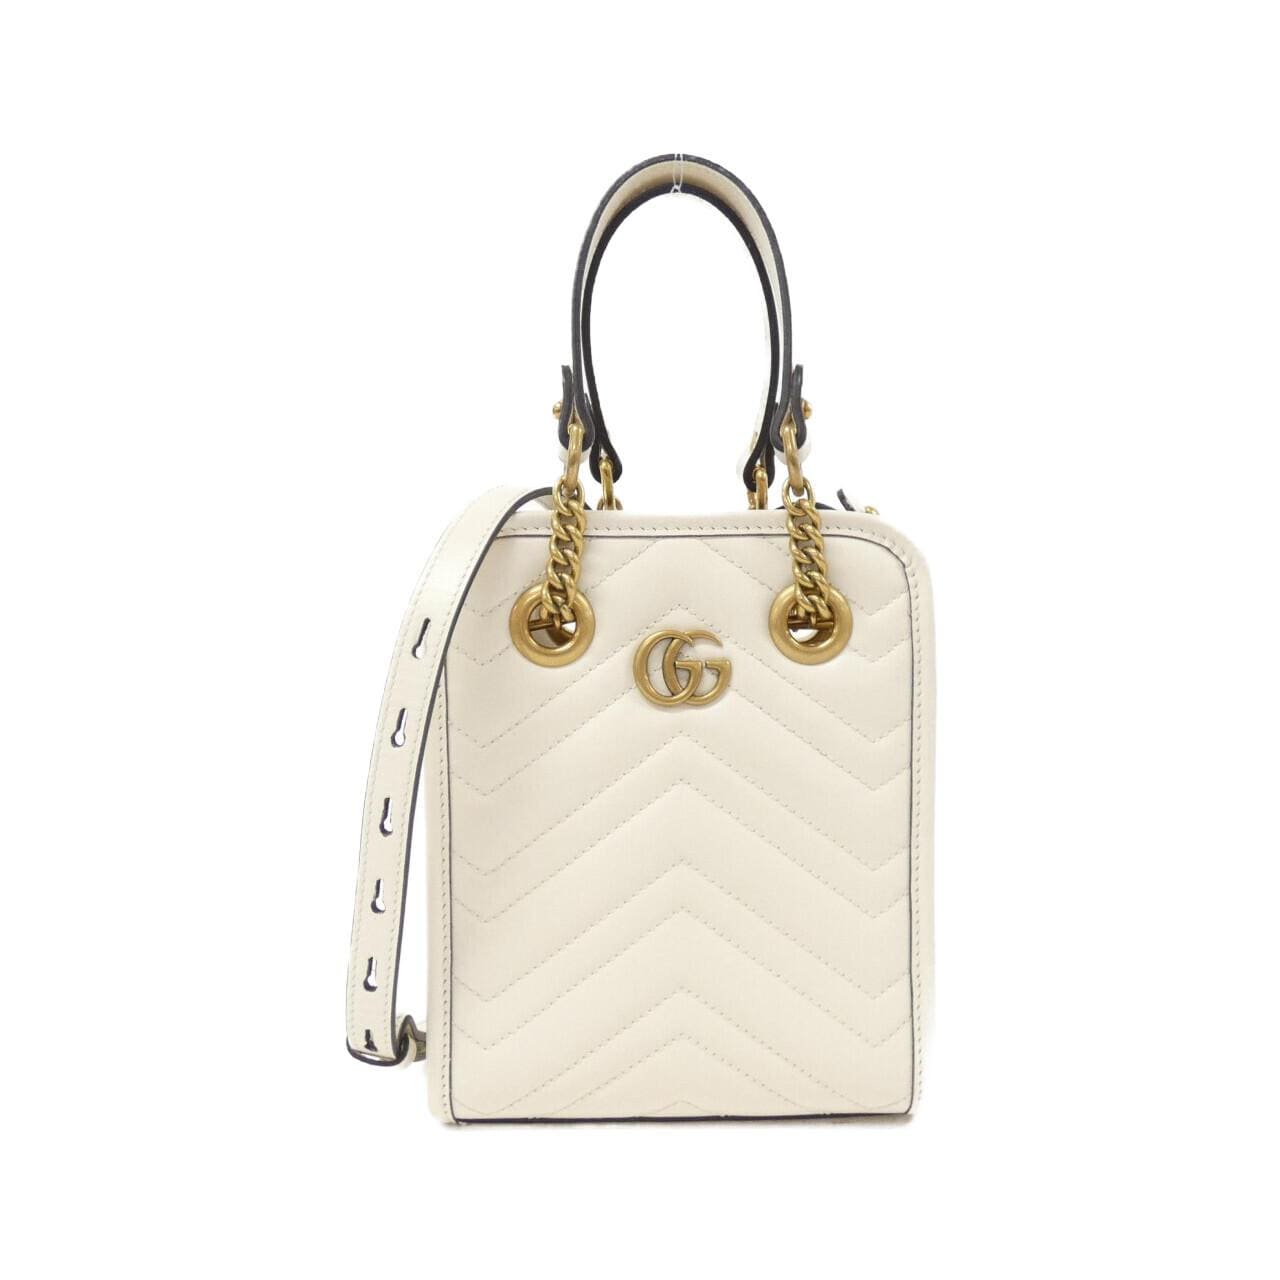 Gucci GG MARMONT 696123 DTDHT Bag